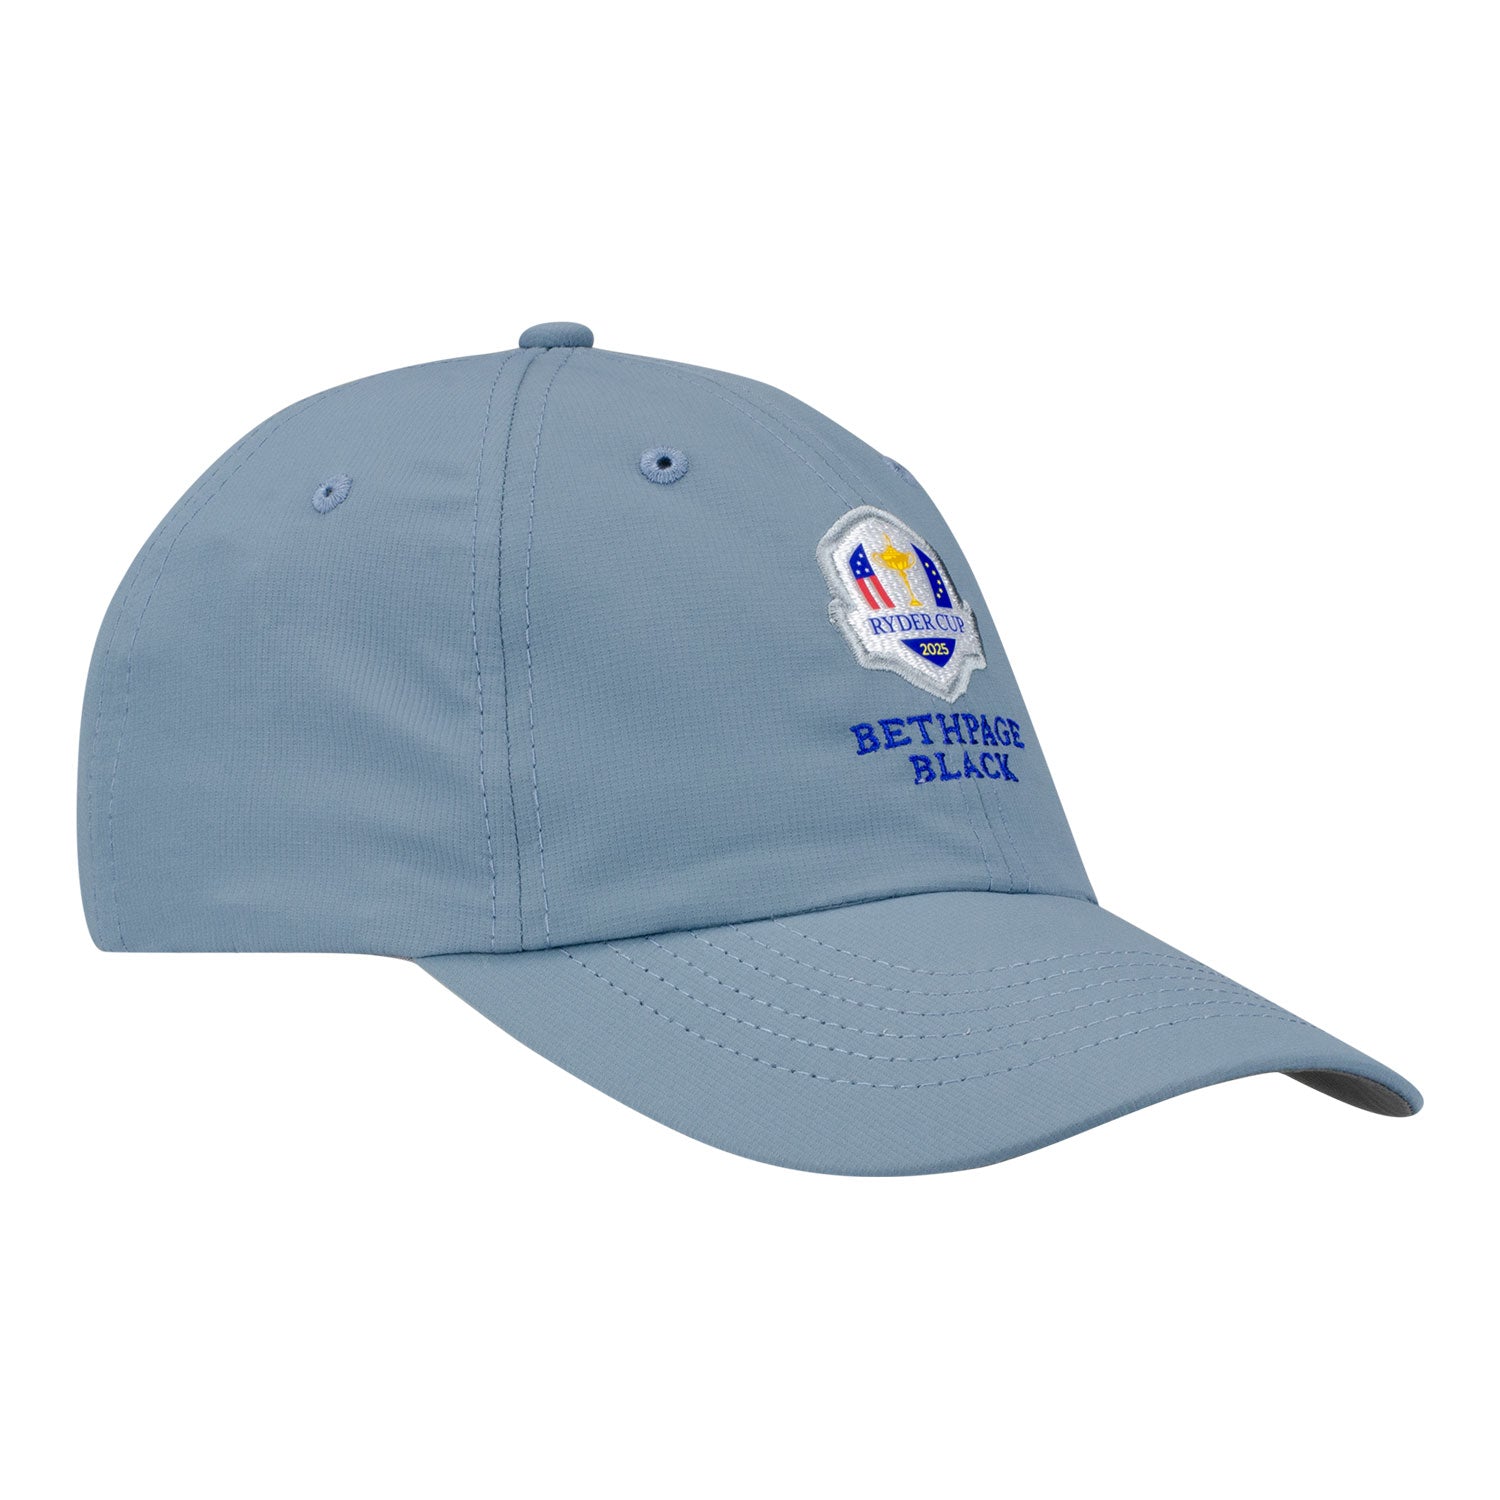 Imperial 2025 Ryder Cup Original Performance Hat in Breaker Blue - Angled Front Left View